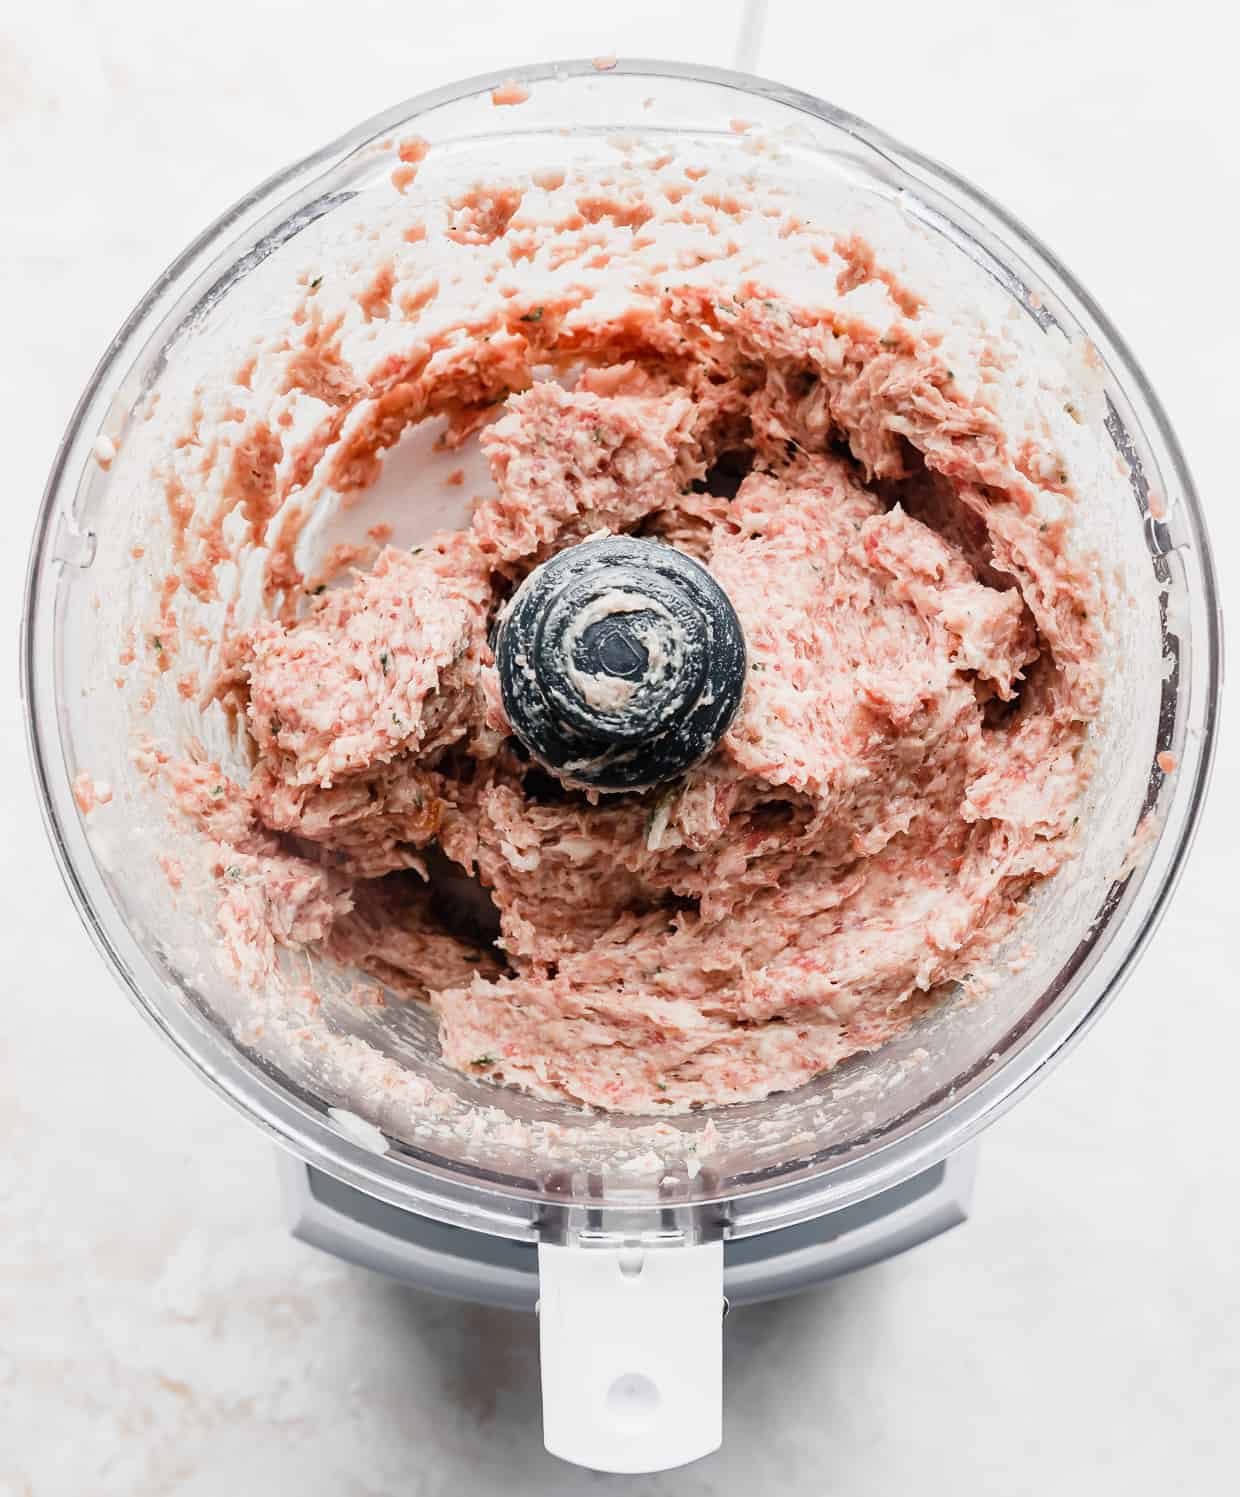 Ground lamb gyro meat in a food processor.